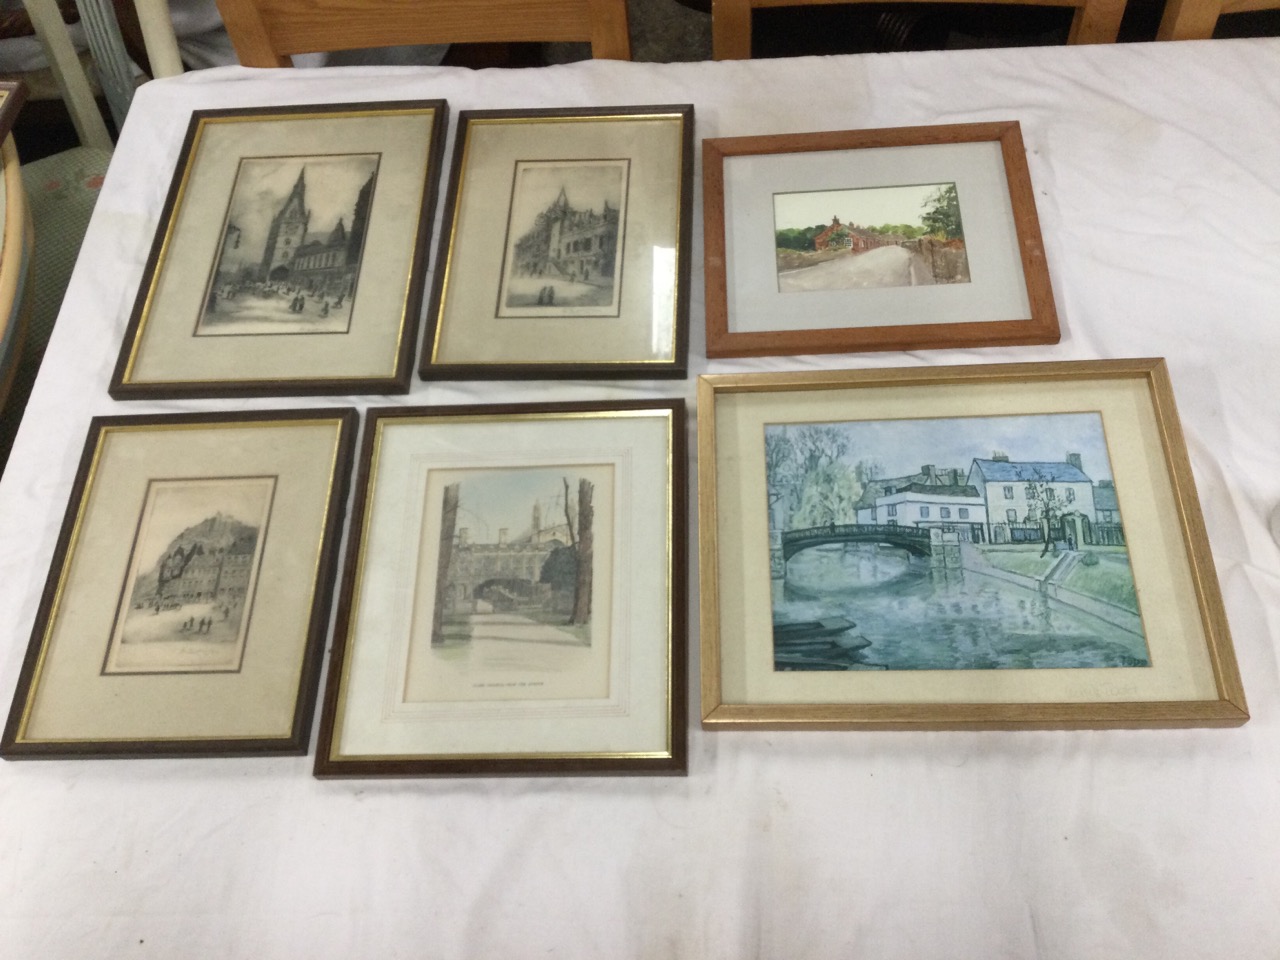 W Laidlaw?, a set of three Edinburgh townscape etchings with figures, signed indistinctly in